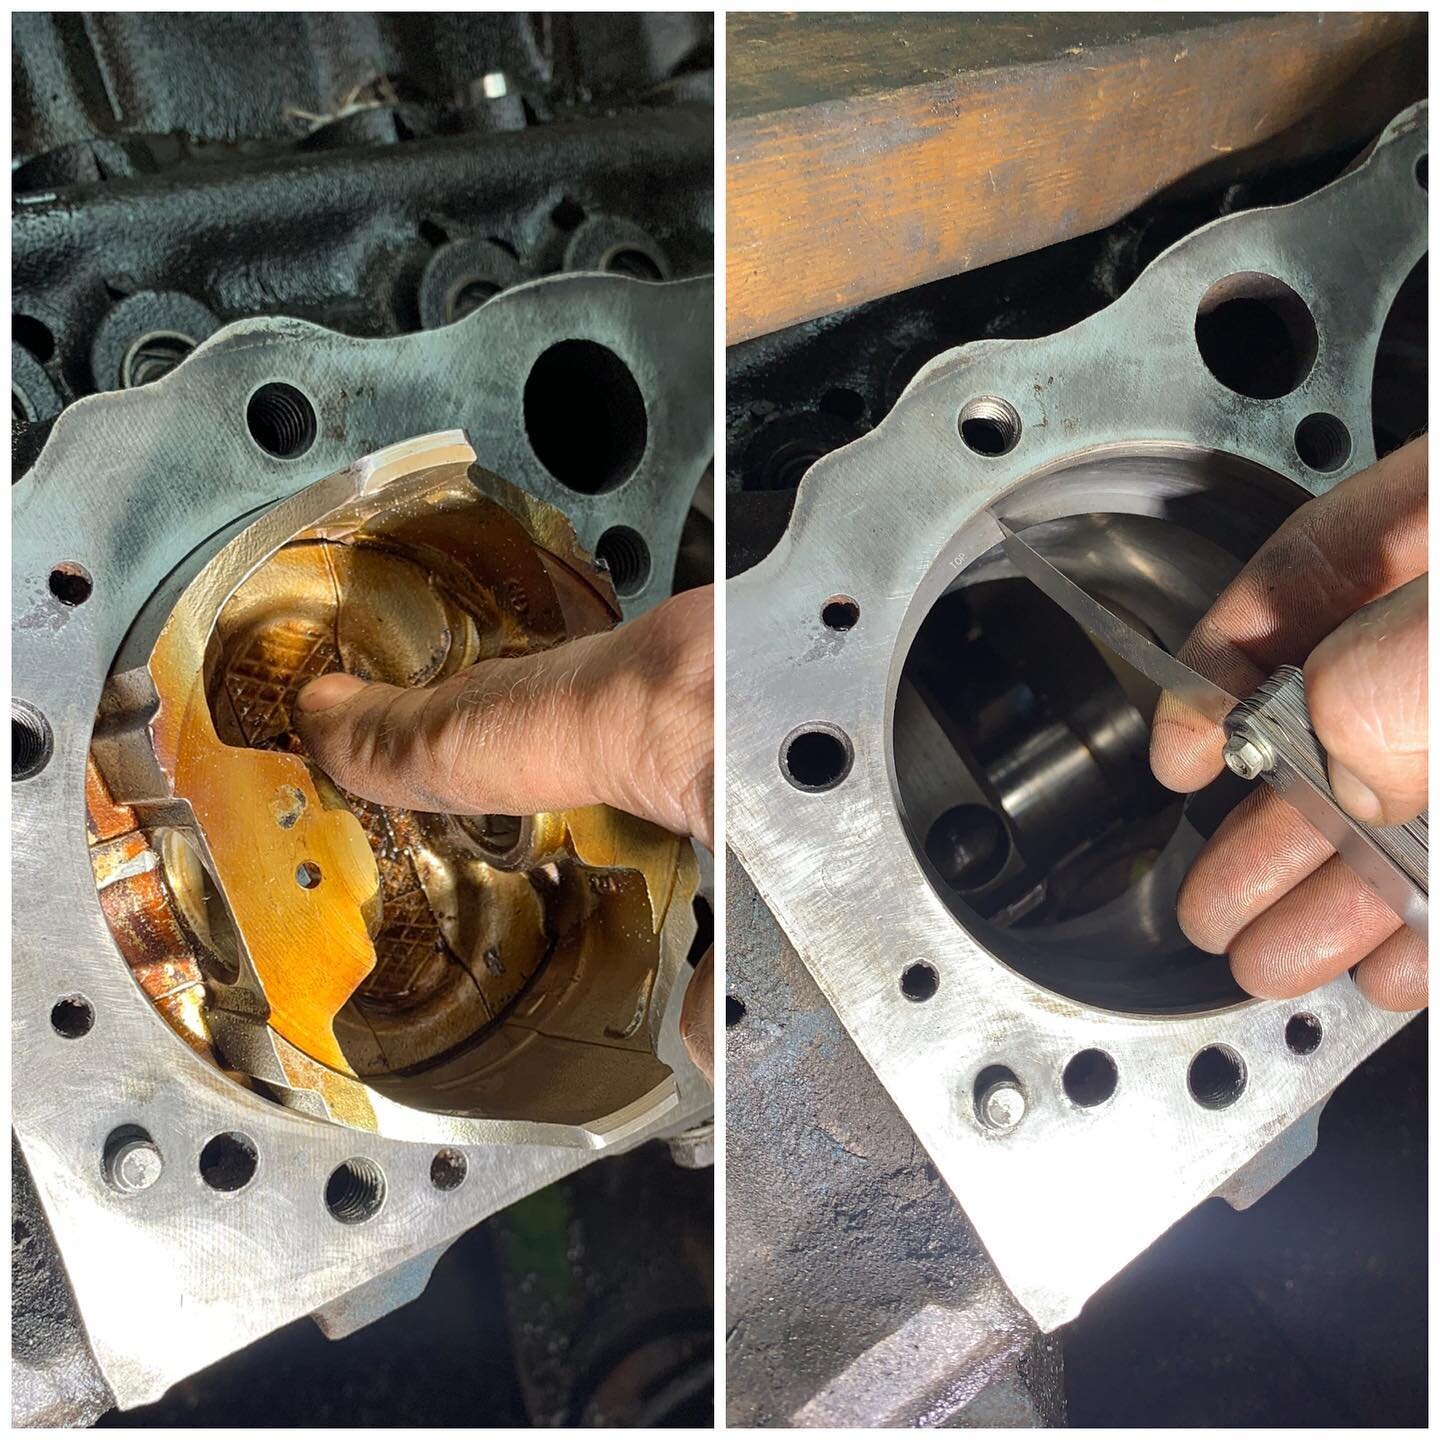 It&rsquo;s crucial to set your ring end gap to insure proper compression and prevent oil blowby. You can actually use an old piston to square the rings in the bore!